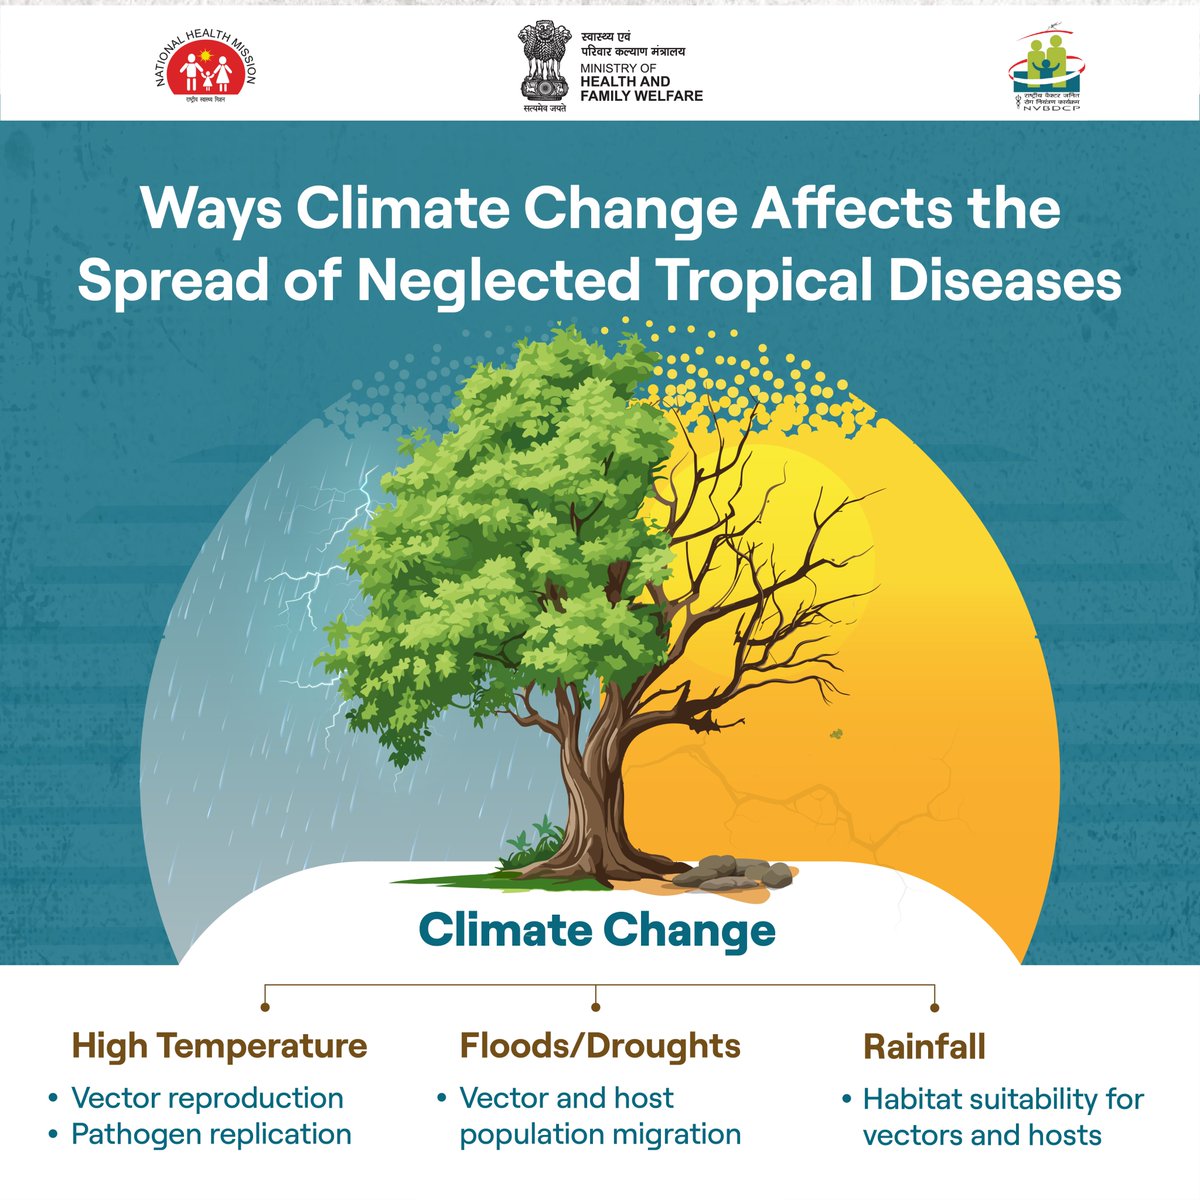 #ClimateChange is a growing threat, intensifying neglected tropical diseases (#NTDs) and endangering over a billion lives.

Supporting government efforts to eliminate these diseases is vital to safeguarding public health amid climatic disruptions.

#NTDFreeIndia #LFFreeIndia